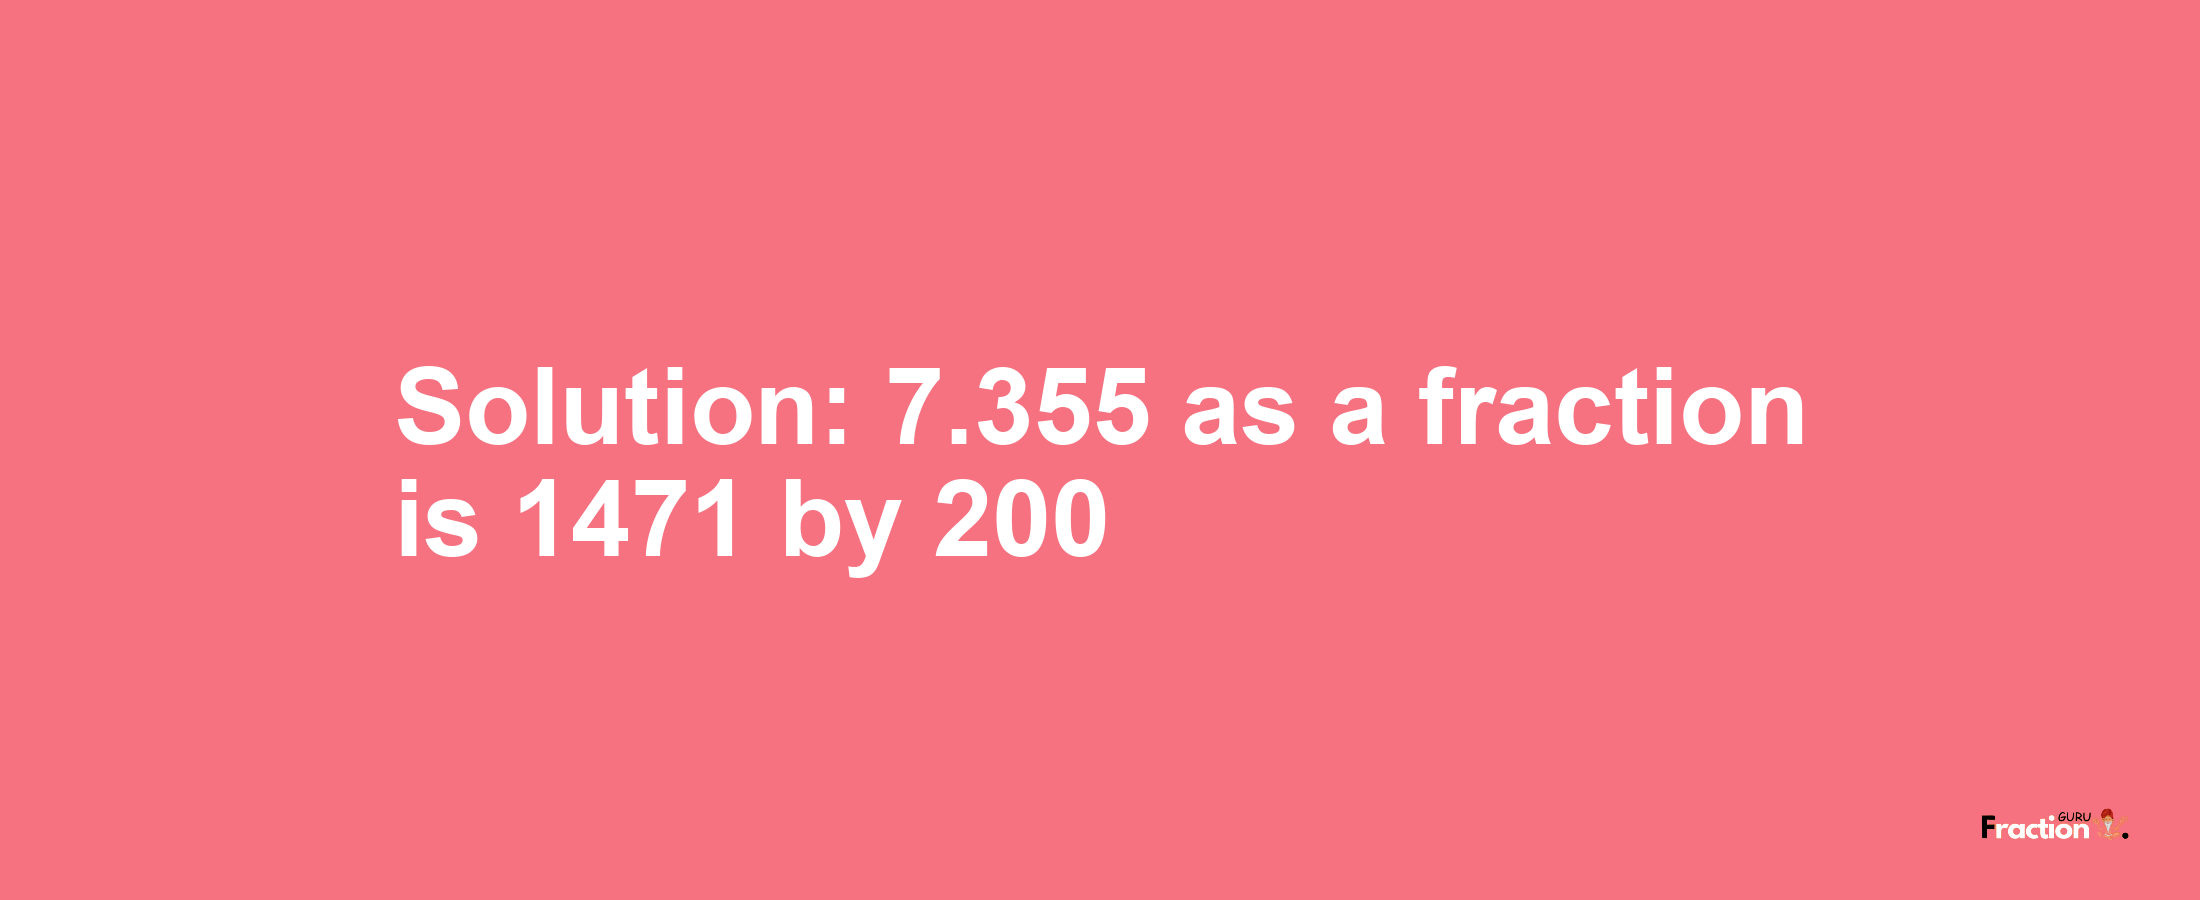 Solution:7.355 as a fraction is 1471/200